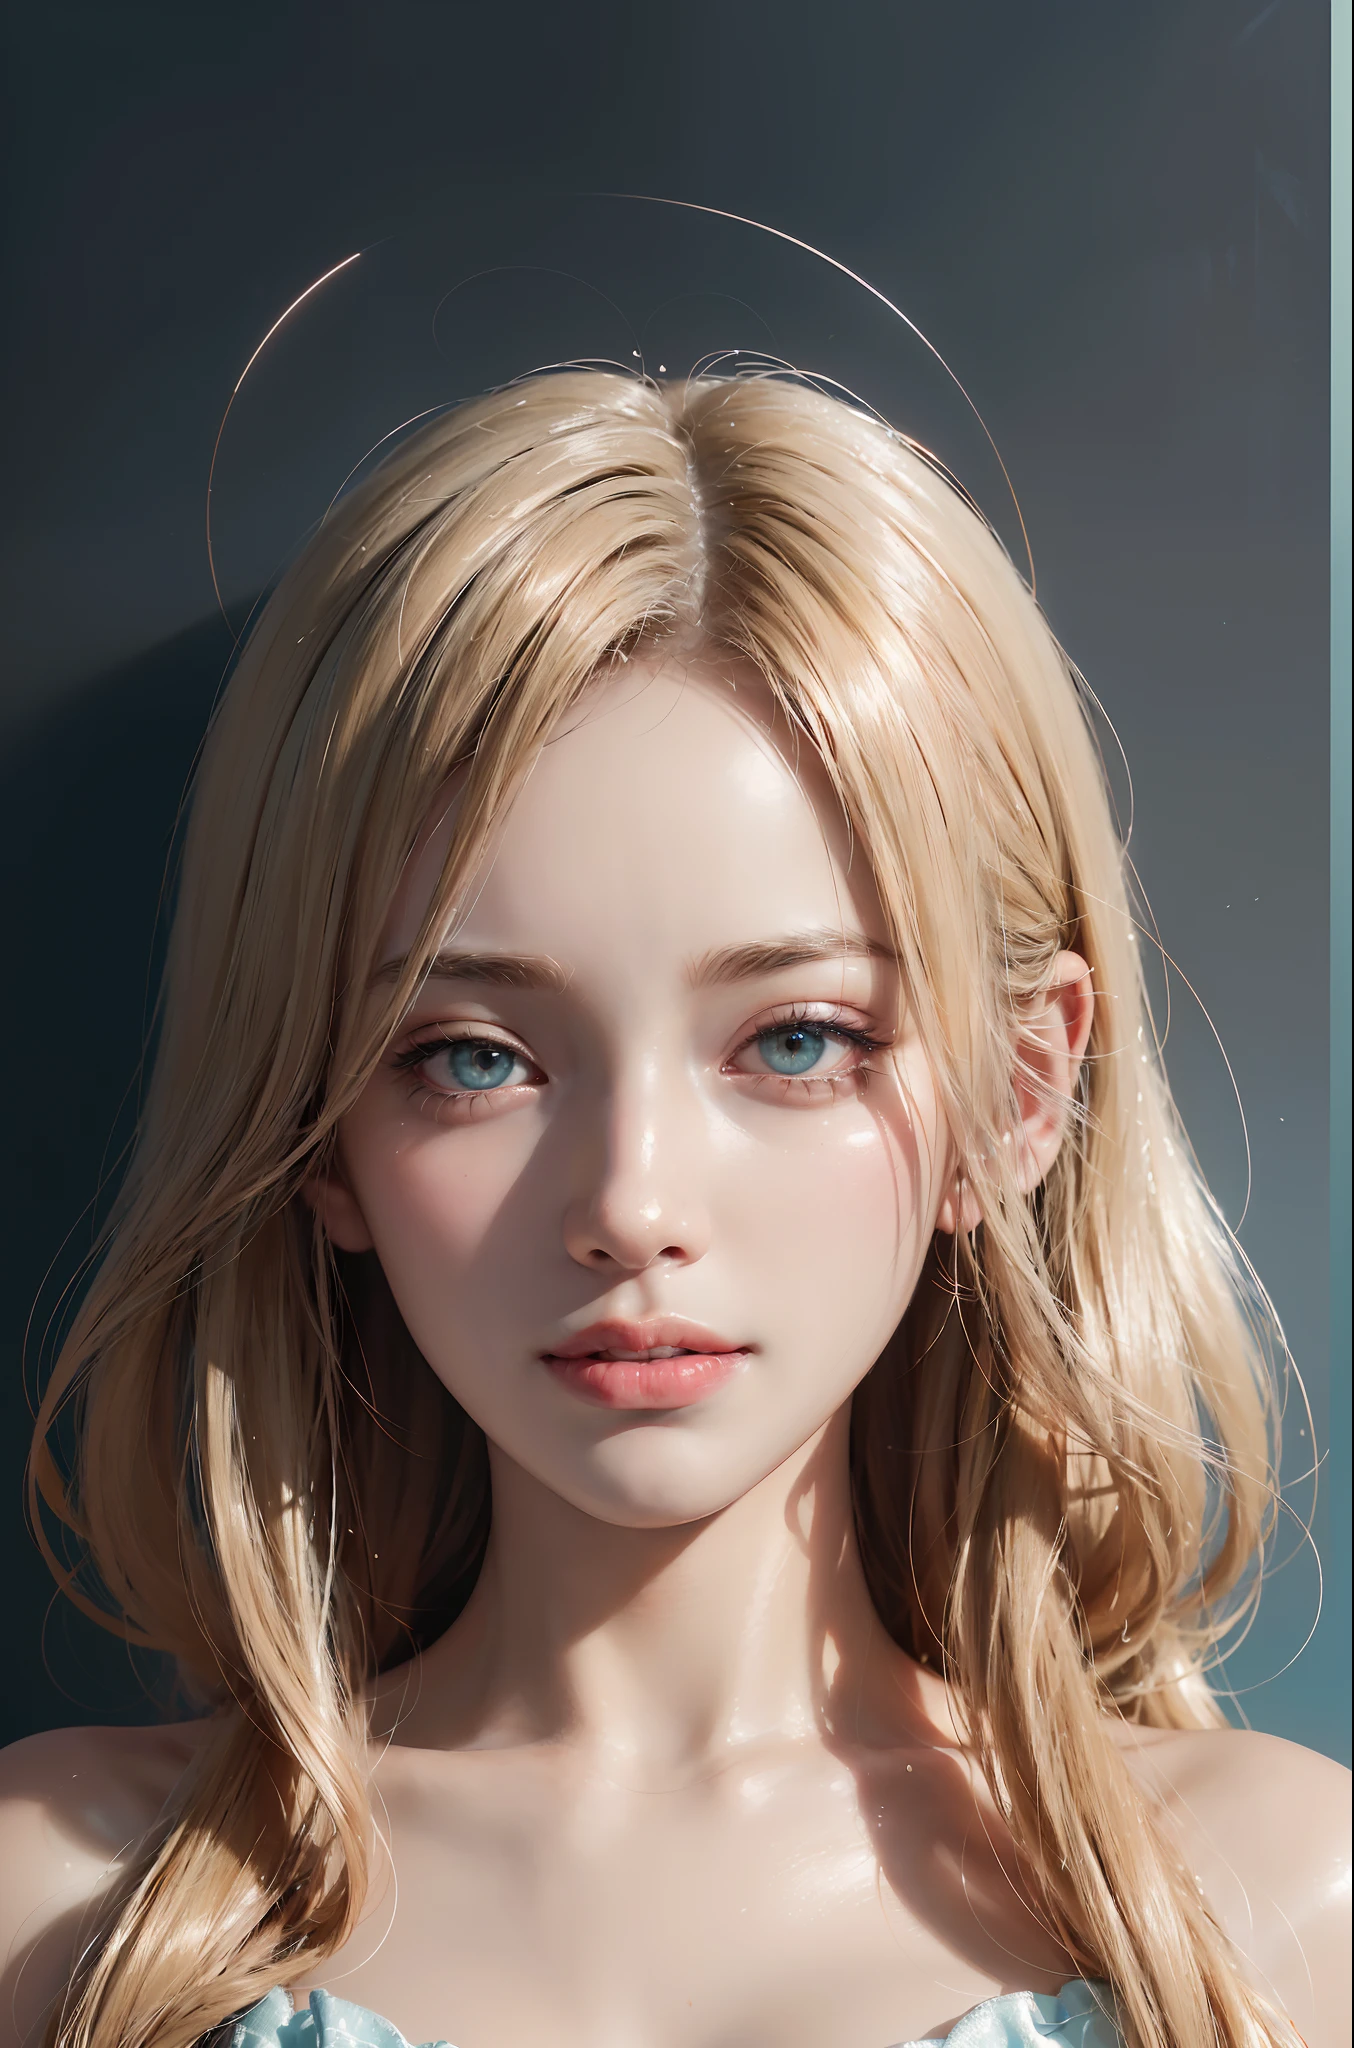 (ultra realisic), (Illustration), (Resolution Enhancement), (8K), (Extremely detailed), (Best Illustration), (beautiful-detailed eyes), (Best Quality), (The ultra-detailliert), (Masterpiece ), ( wall paper), (Detailed face),a blond, Wavy hair,(hi-top fade:1.3), (Smiling broadly, bright look), dark theme, soothing tones, muted colors, High contrast, (Natural skin texture, hyperrealism, Soft light, edgy),exposure blend, medium shot, Bokeh, (HDR:1.4), High contrast, (films, teal and orange:0.85), (muted colors, faded colors, soothing tones:1.3), Low saturation, (hyperdetailed:1.2), (black:0.4)